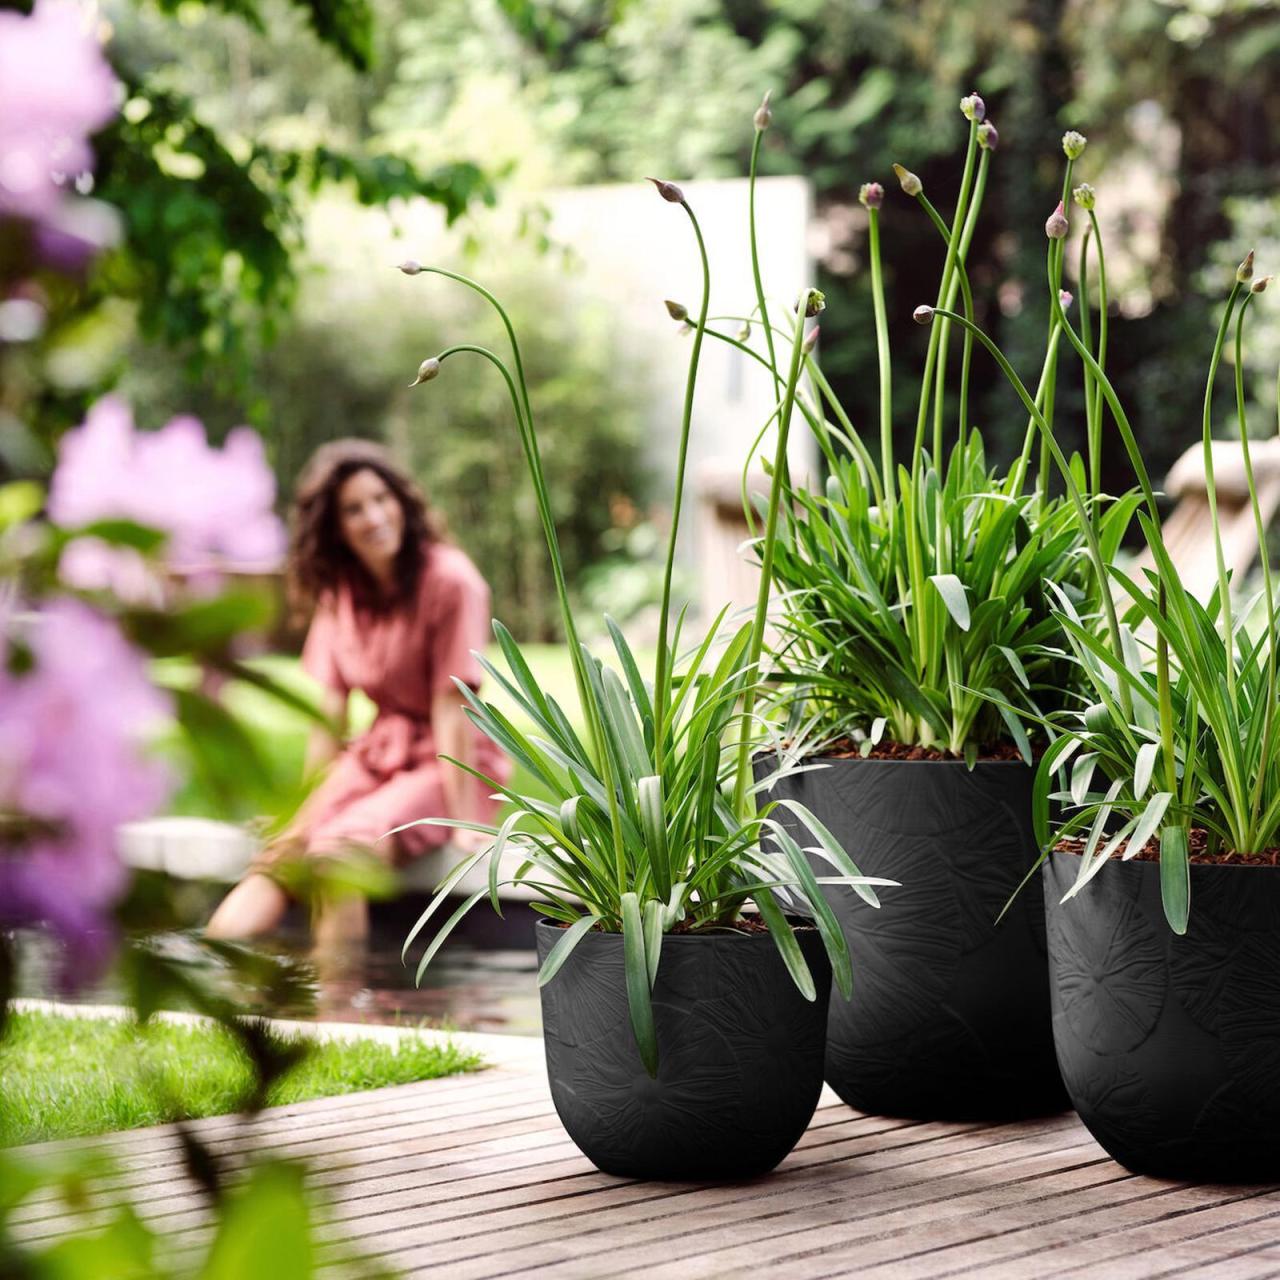 Hanging Plants Indoor | Bunnings Elho Pots: A Guide to Design, Durability, and Versatility